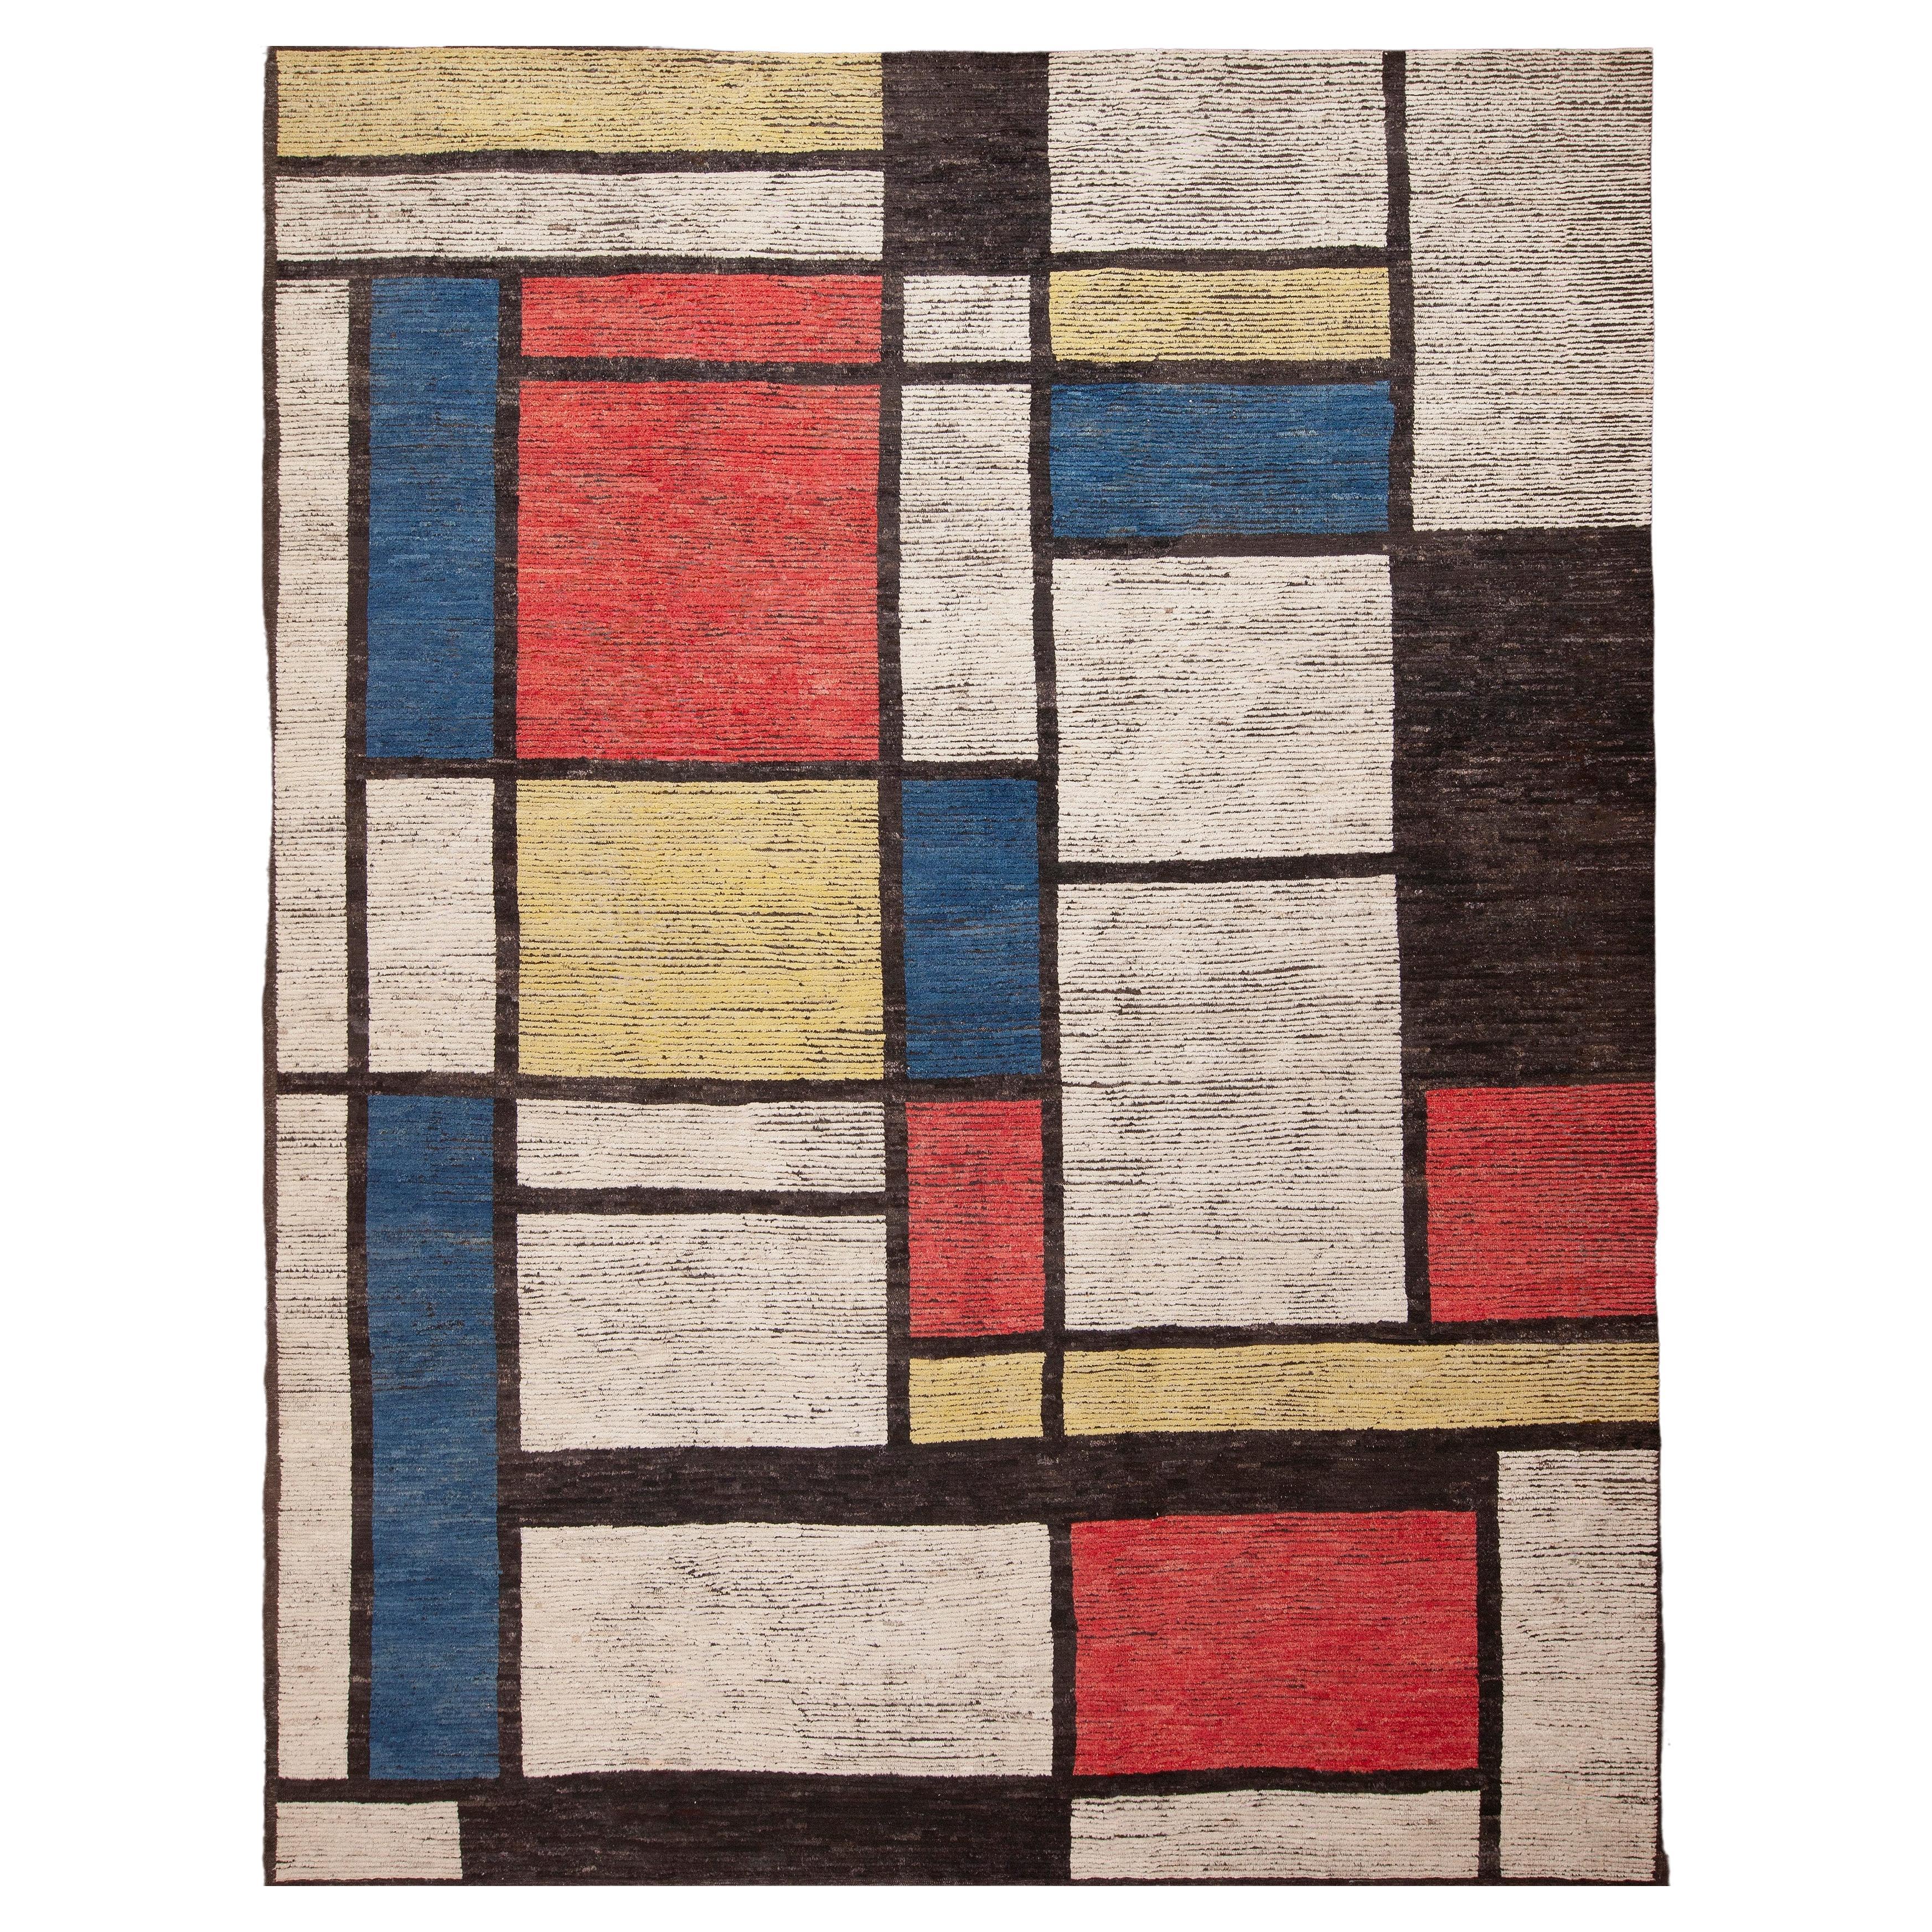 Nazmiyal Collection Contemporary Artistic Piet Mondrian Modern Rug 10'8" x 14' For Sale